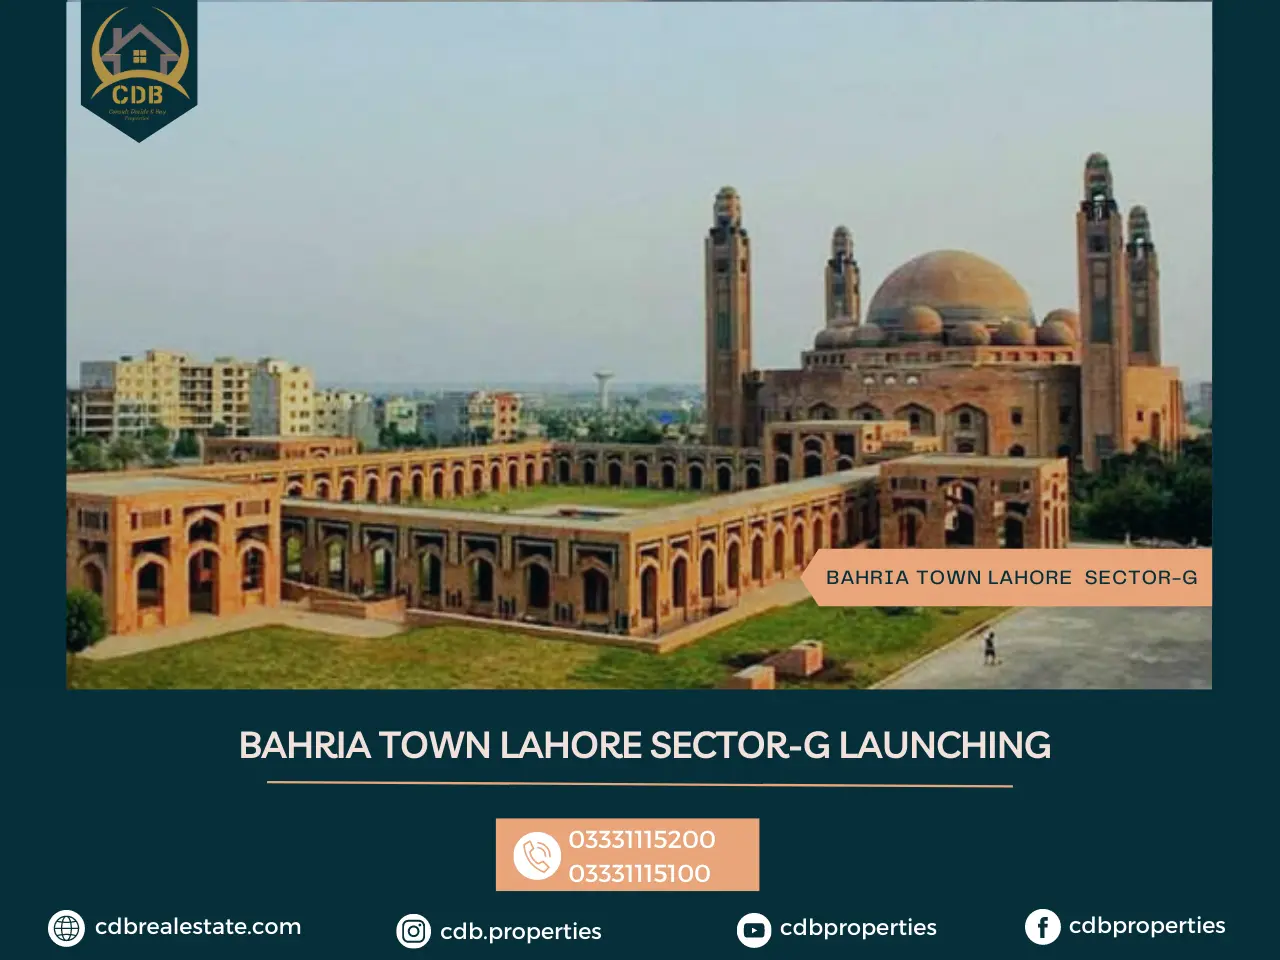 Grand Mosque in Bahria Town Lahore